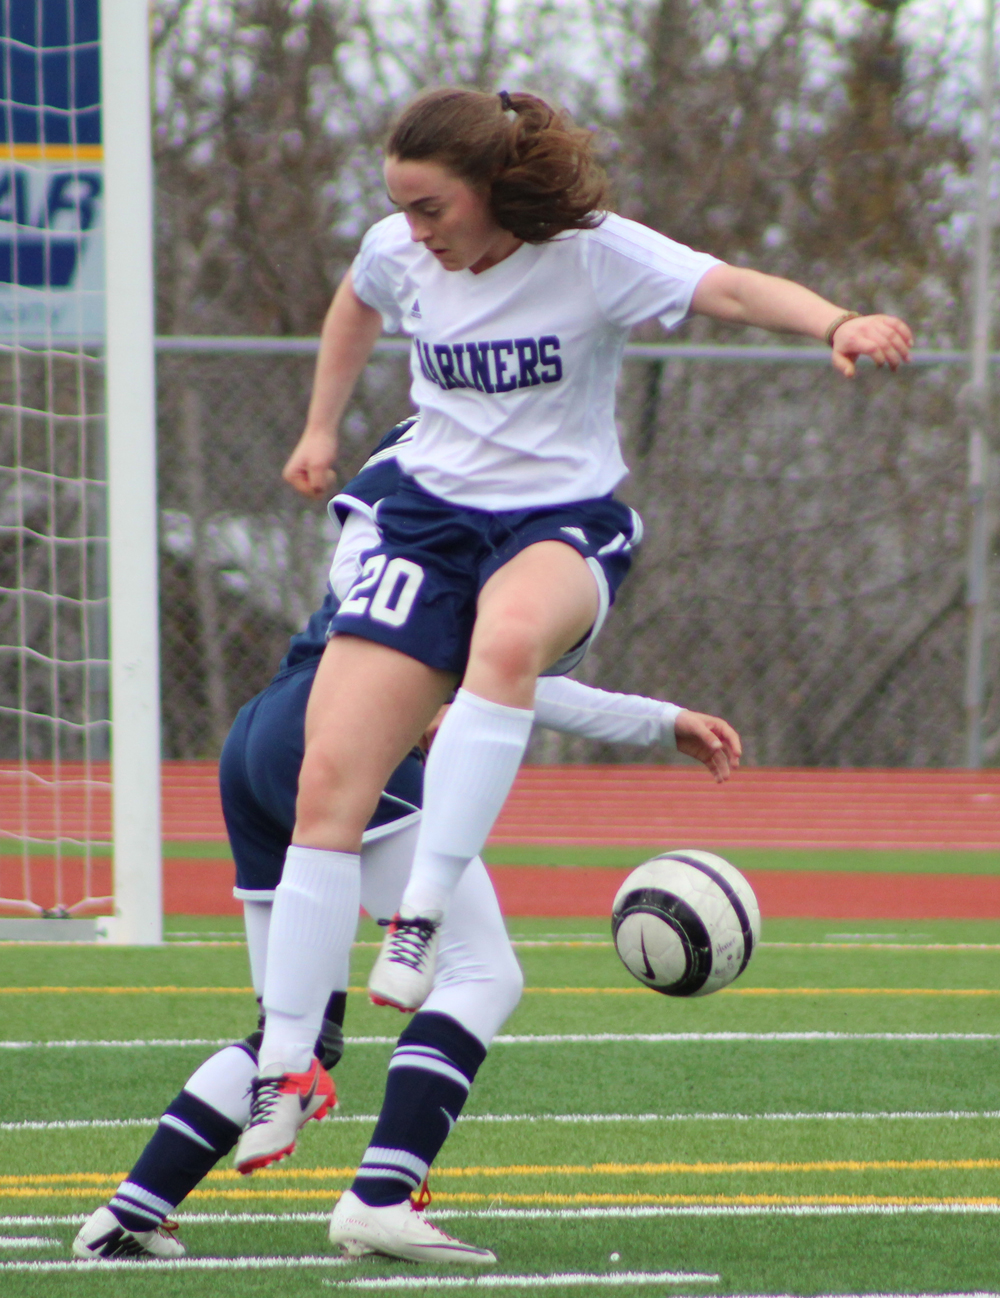 Alison McCarron leaps toward the ball as a Soldotna player kicks it away. Homer girls played Soldotna on Tuesday, April 19 and finished with a 3-0 loss.-Photo by Anna Frost; Homer News